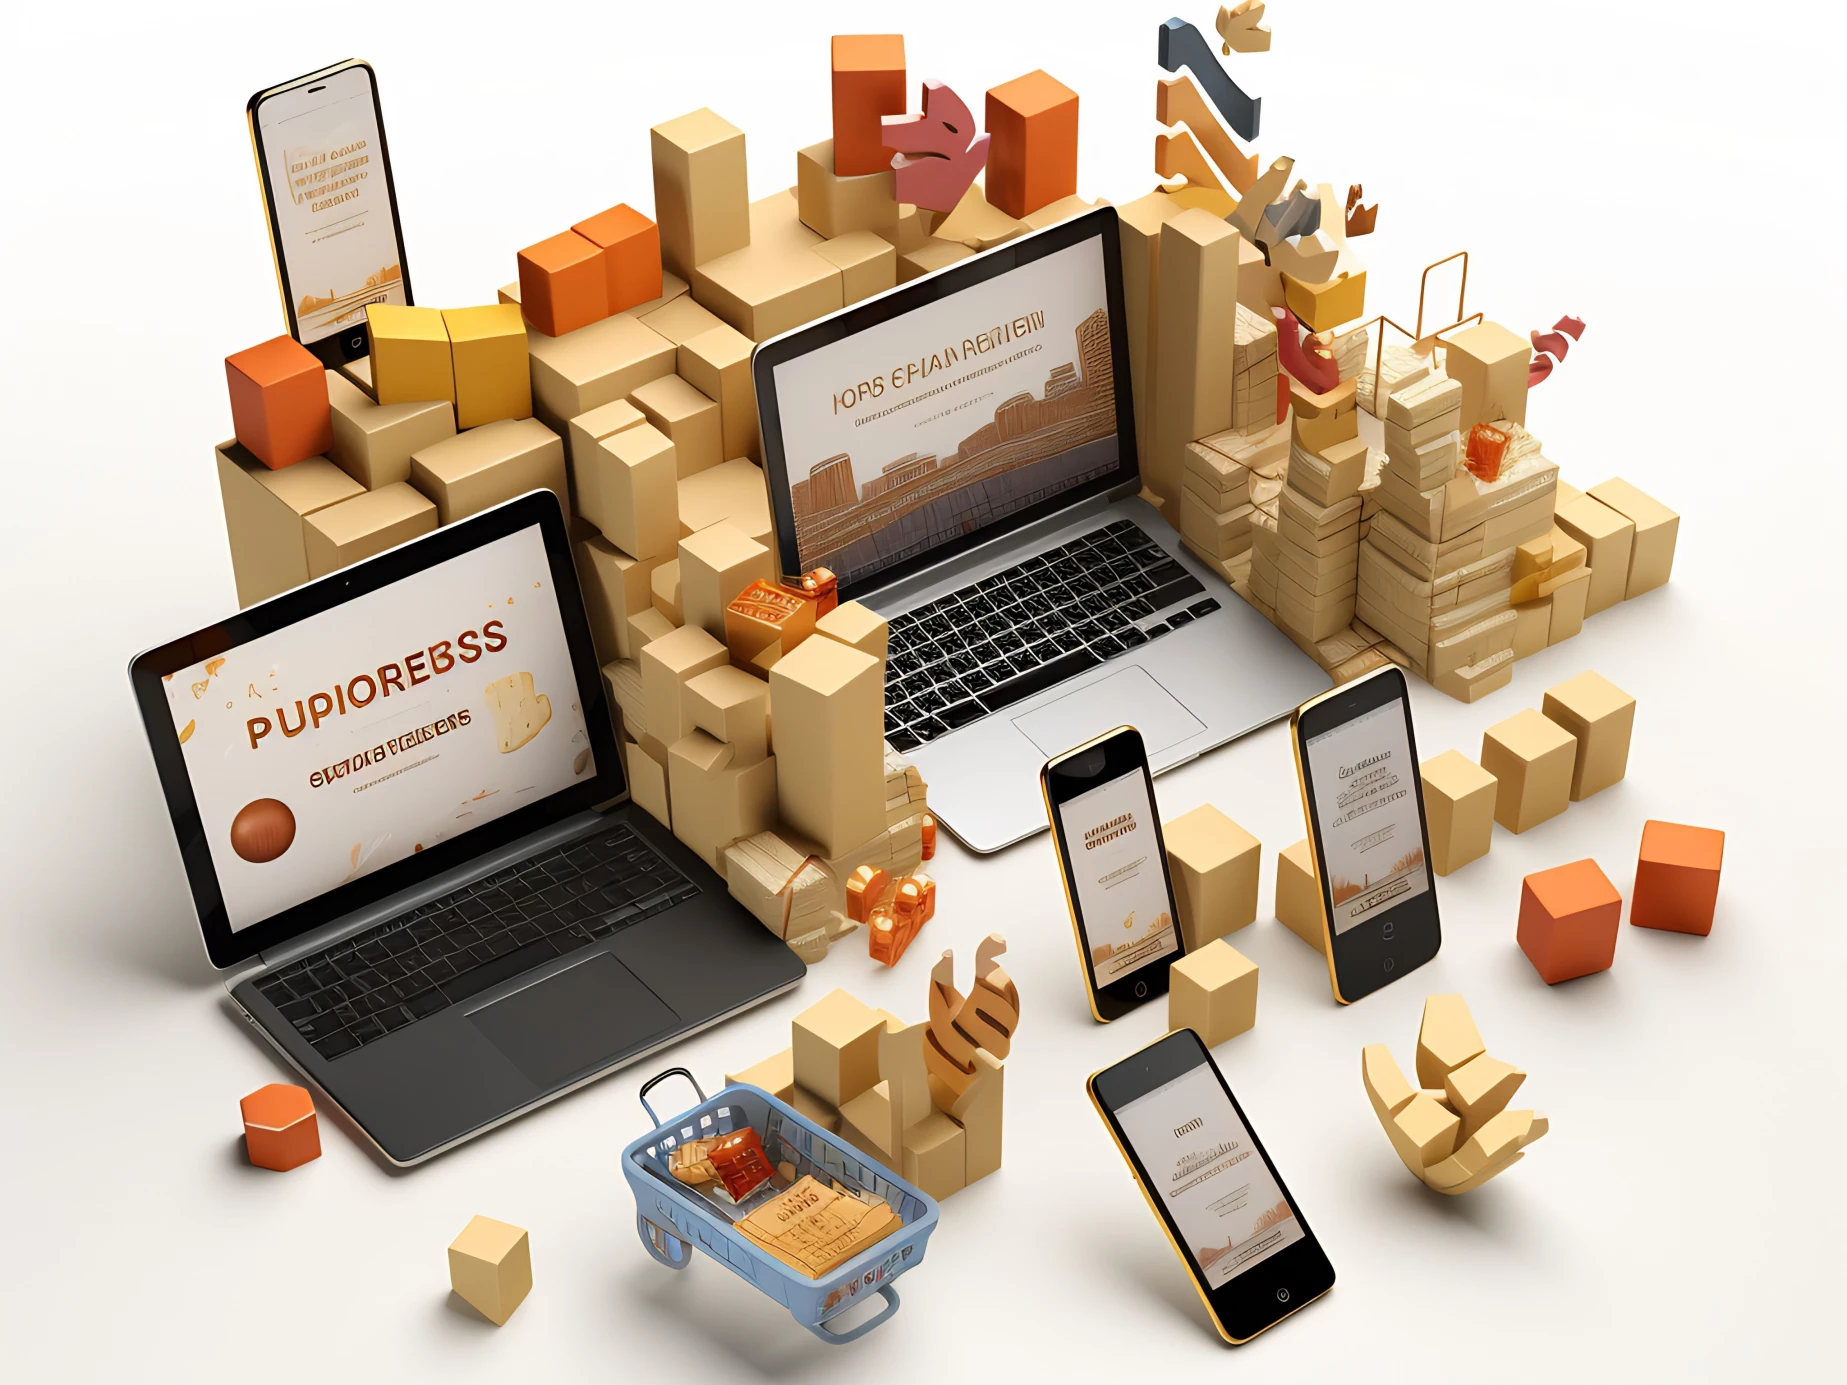 Cross-border e-commerce: potential to connect Vietnam - China markets